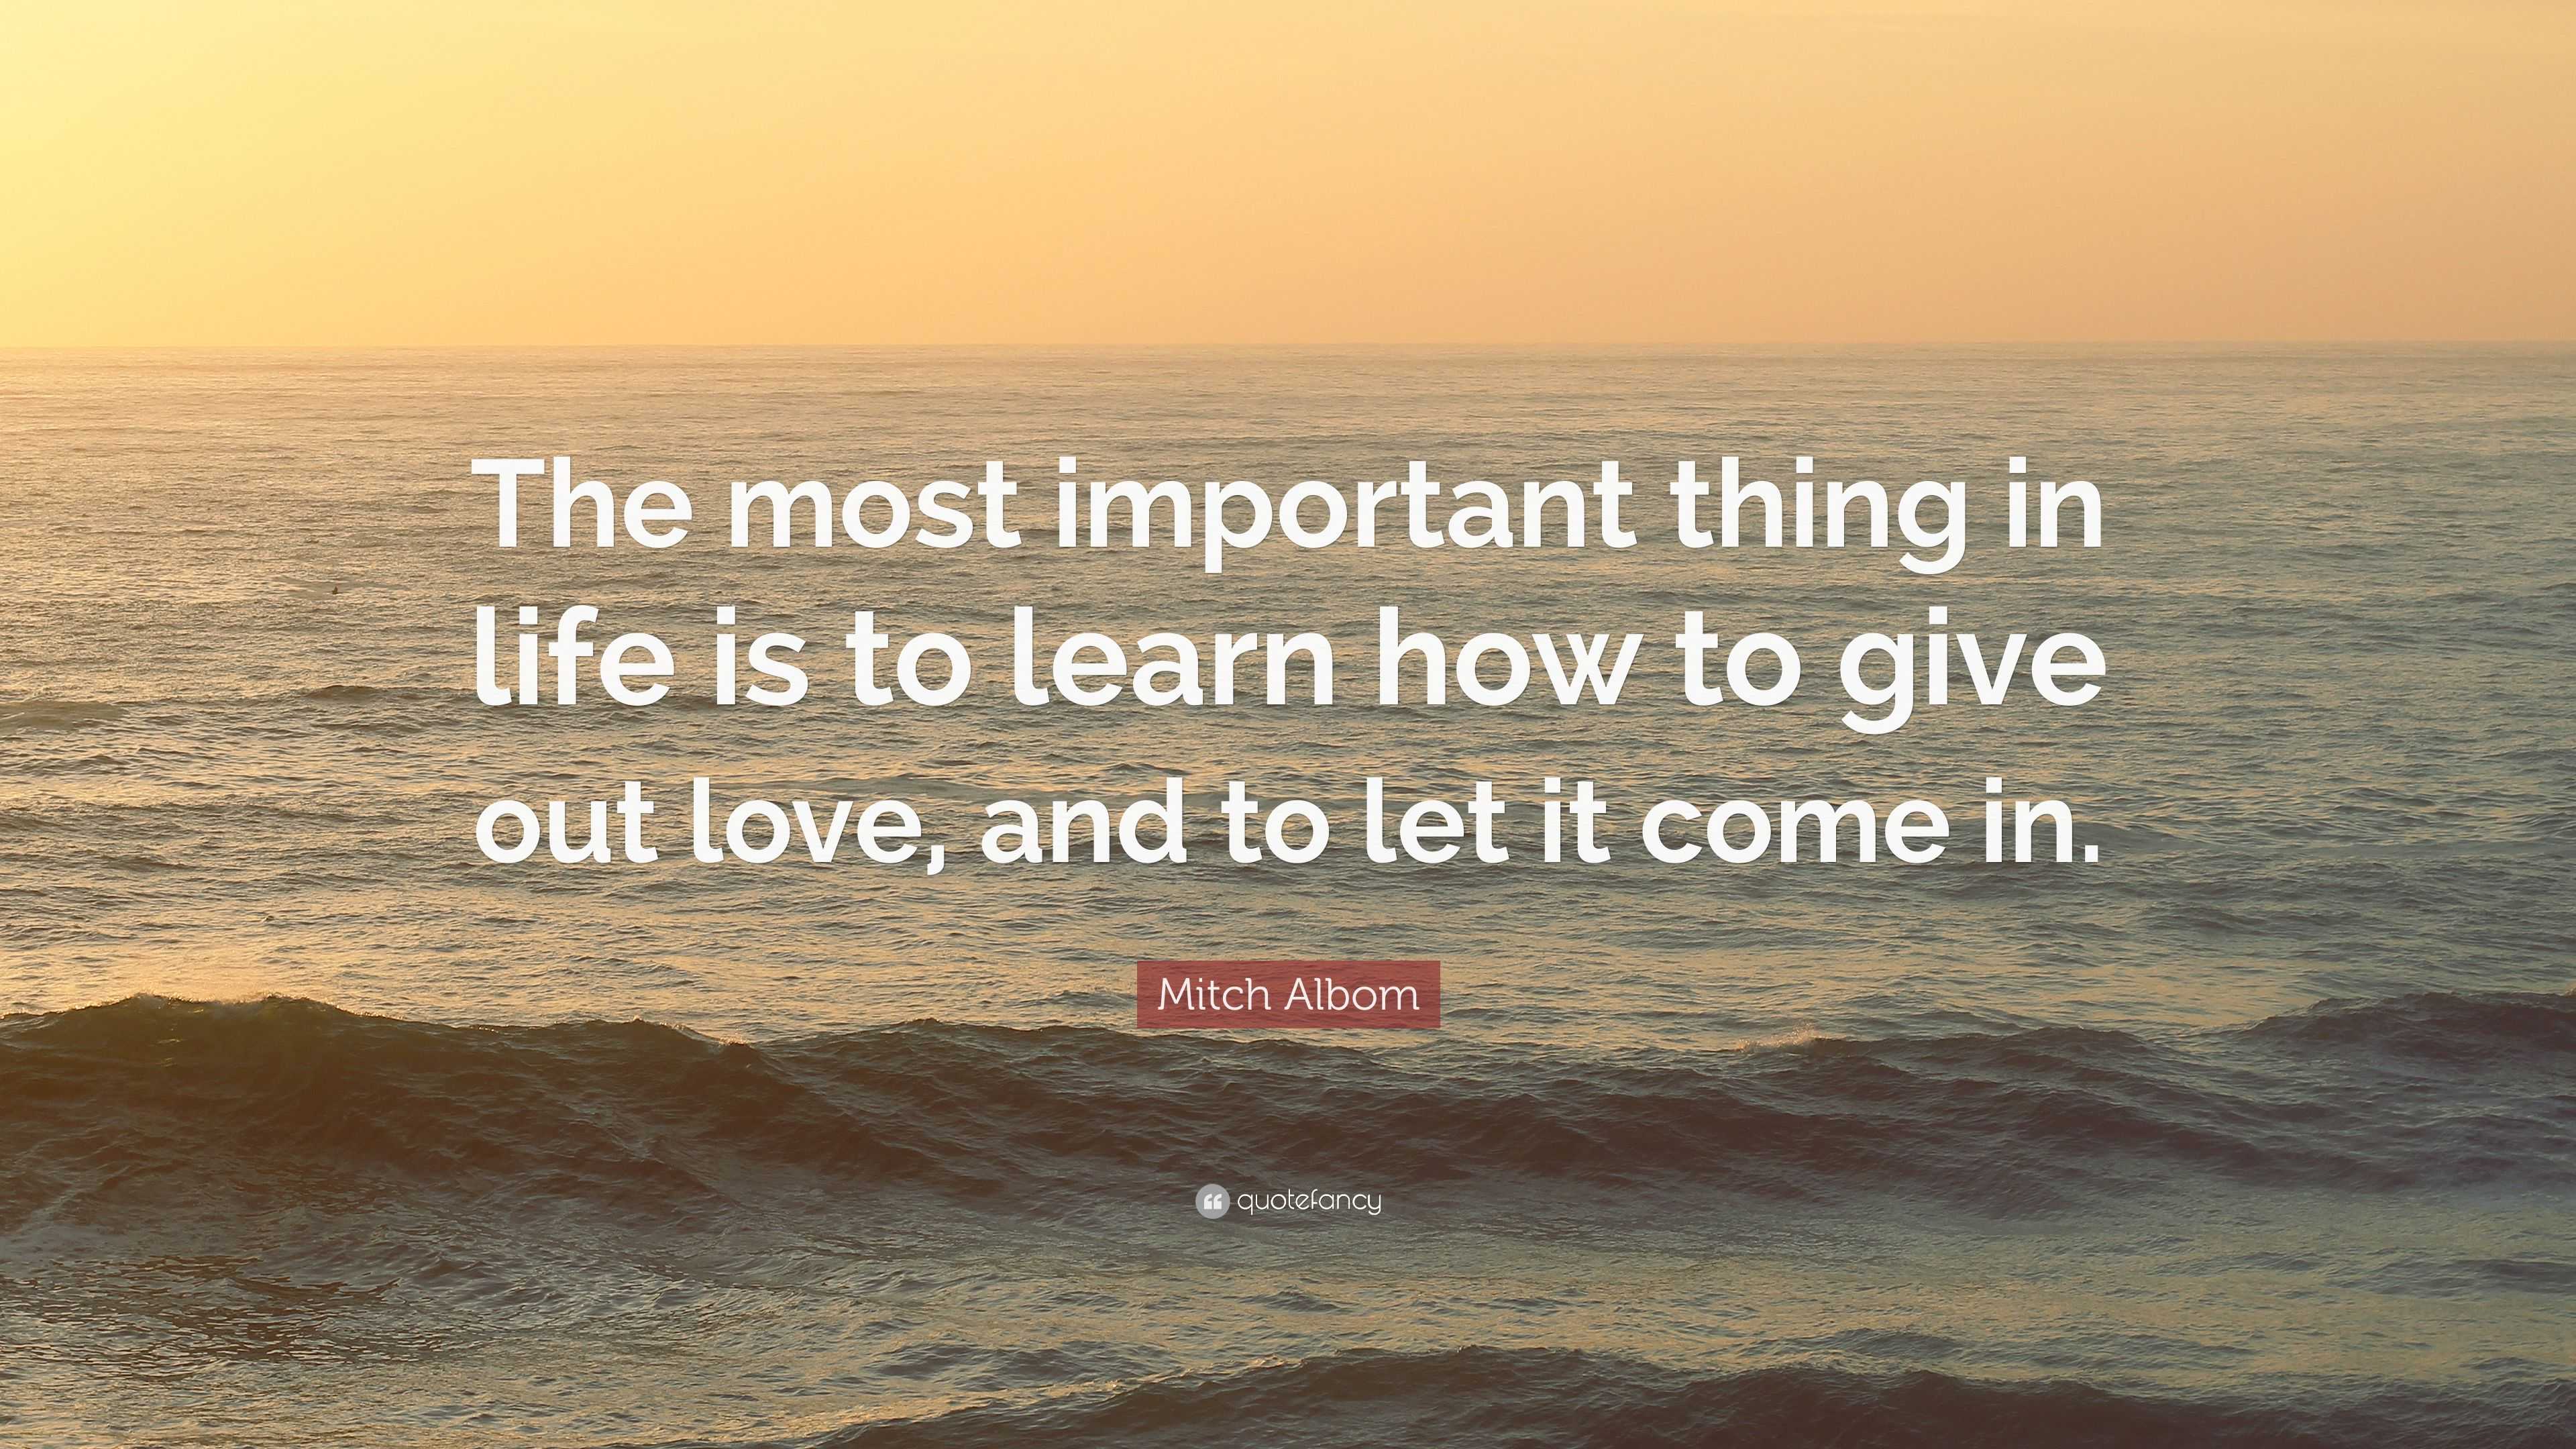 Mitch Albom Quote “The most important thing in life is to learn how to